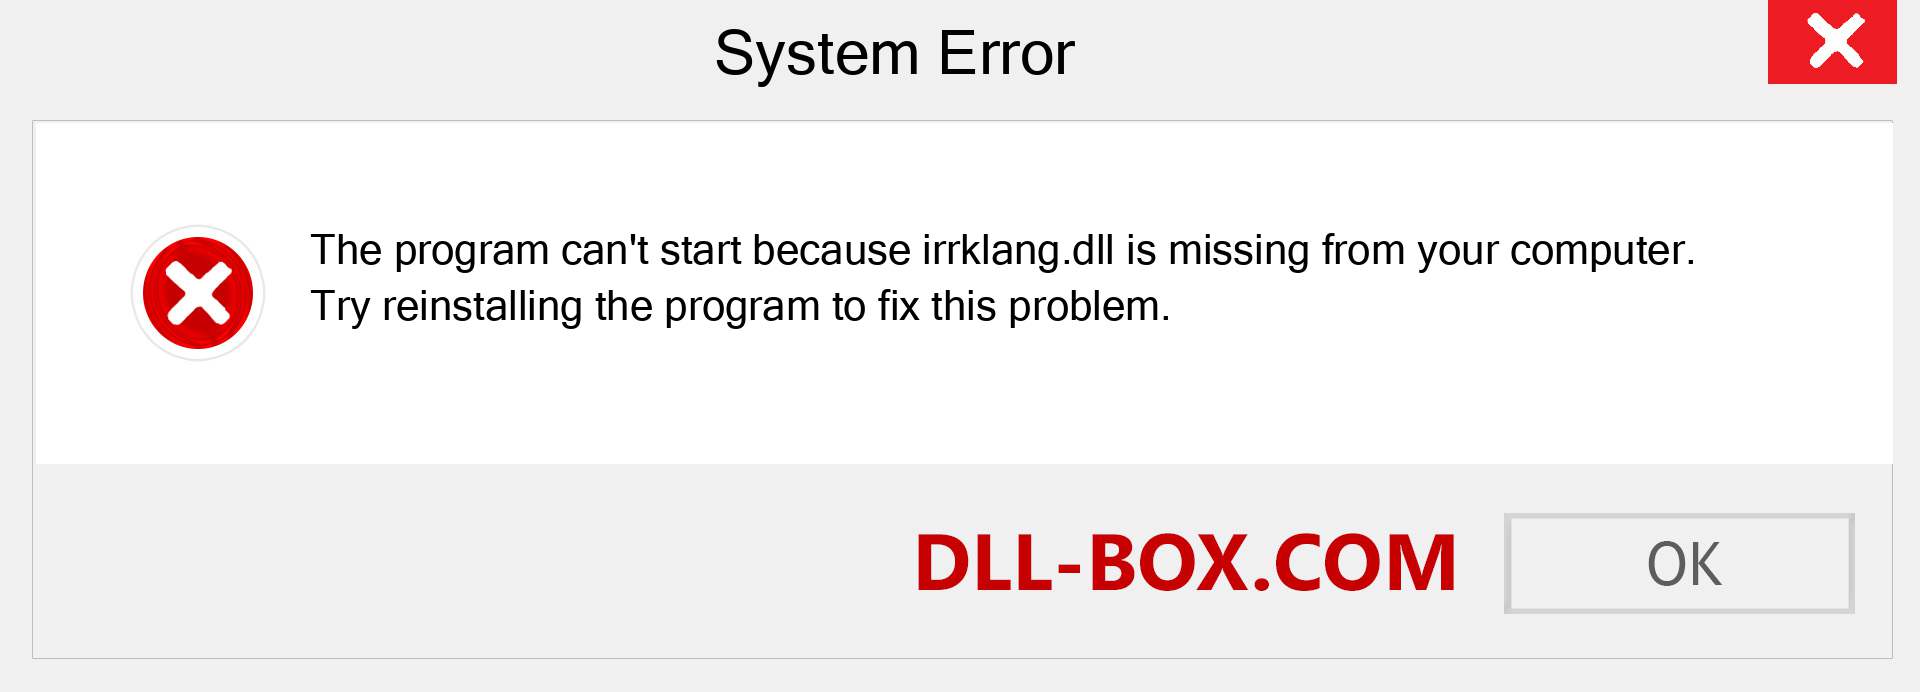  irrklang.dll file is missing?. Download for Windows 7, 8, 10 - Fix  irrklang dll Missing Error on Windows, photos, images